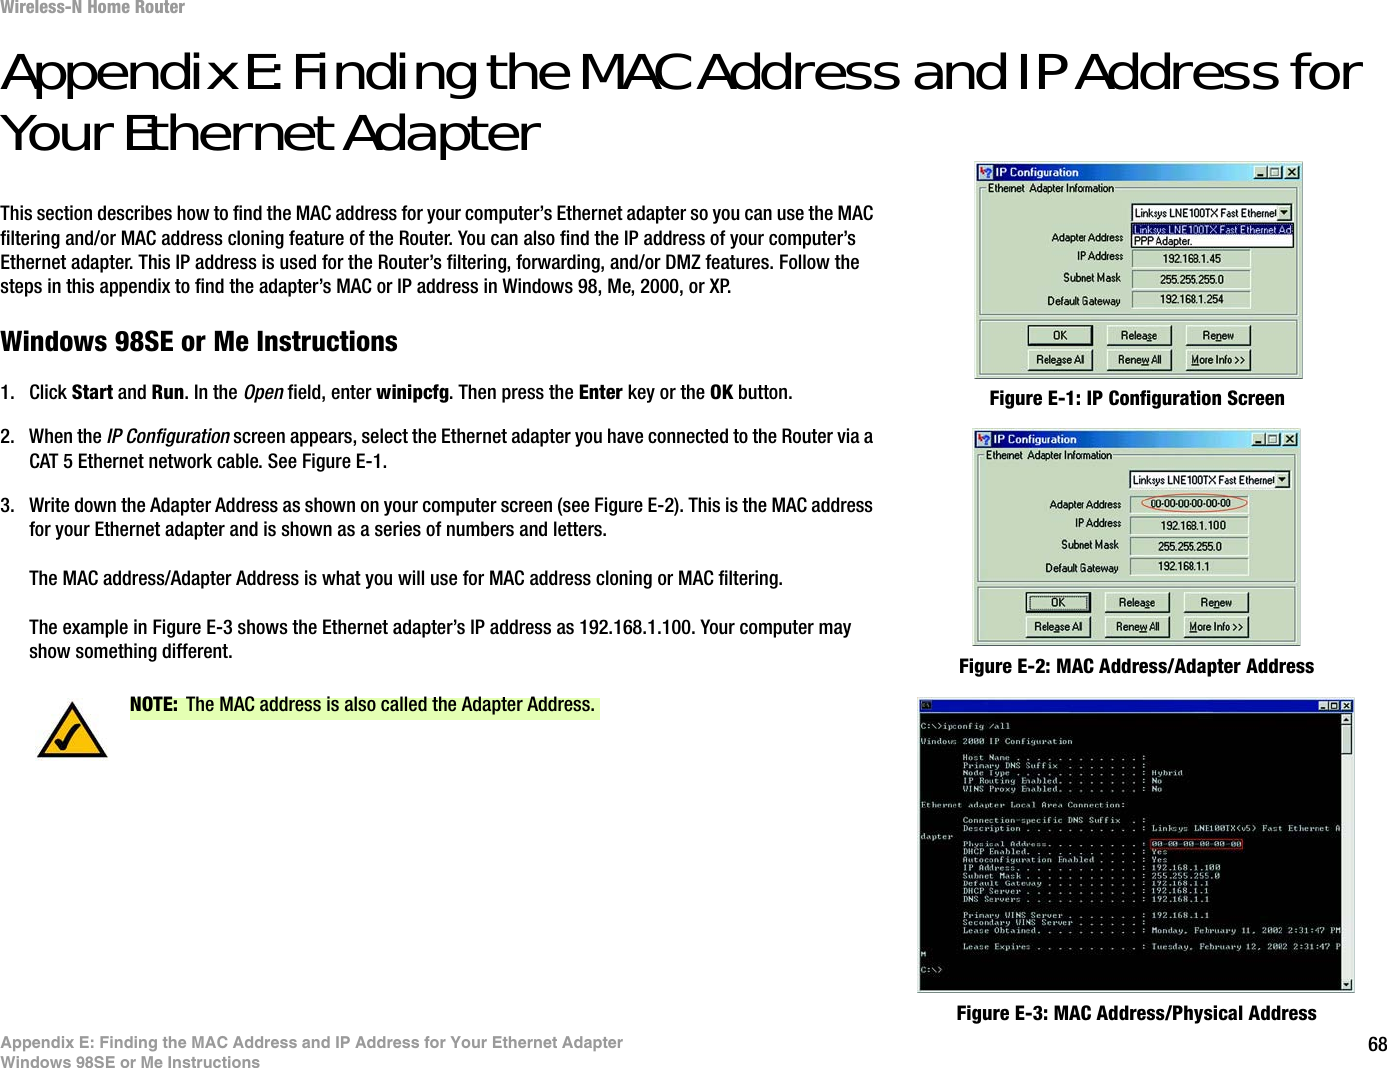 68Appendix E: Finding the MAC Address and IP Address for Your Ethernet AdapterWindows 98SE or Me InstructionsWireless-N Home RouterAppendix E: Finding the MAC Address and IP Address for Your Ethernet AdapterThis section describes how to find the MAC address for your computer’s Ethernet adapter so you can use the MAC filtering and/or MAC address cloning feature of the Router. You can also find the IP address of your computer’s Ethernet adapter. This IP address is used for the Router’s filtering, forwarding, and/or DMZ features. Follow the steps in this appendix to find the adapter’s MAC or IP address in Windows 98, Me, 2000, or XP.Windows 98SE or Me Instructions1. Click Start and Run. In the Open field, enter winipcfg. Then press the Enter key or the OK button. 2. When the IP Configuration screen appears, select the Ethernet adapter you have connected to the Router via a CAT 5 Ethernet network cable. See Figure E-1.3. Write down the Adapter Address as shown on your computer screen (see Figure E-2). This is the MAC address for your Ethernet adapter and is shown as a series of numbers and letters.The MAC address/Adapter Address is what you will use for MAC address cloning or MAC filtering.The example in Figure E-3 shows the Ethernet adapter’s IP address as 192.168.1.100. Your computer may show something different. Figure E-2: MAC Address/Adapter AddressFigure E-1: IP Configuration ScreenNOTE: The MAC address is also called the Adapter Address.Figure E-3: MAC Address/Physical Address